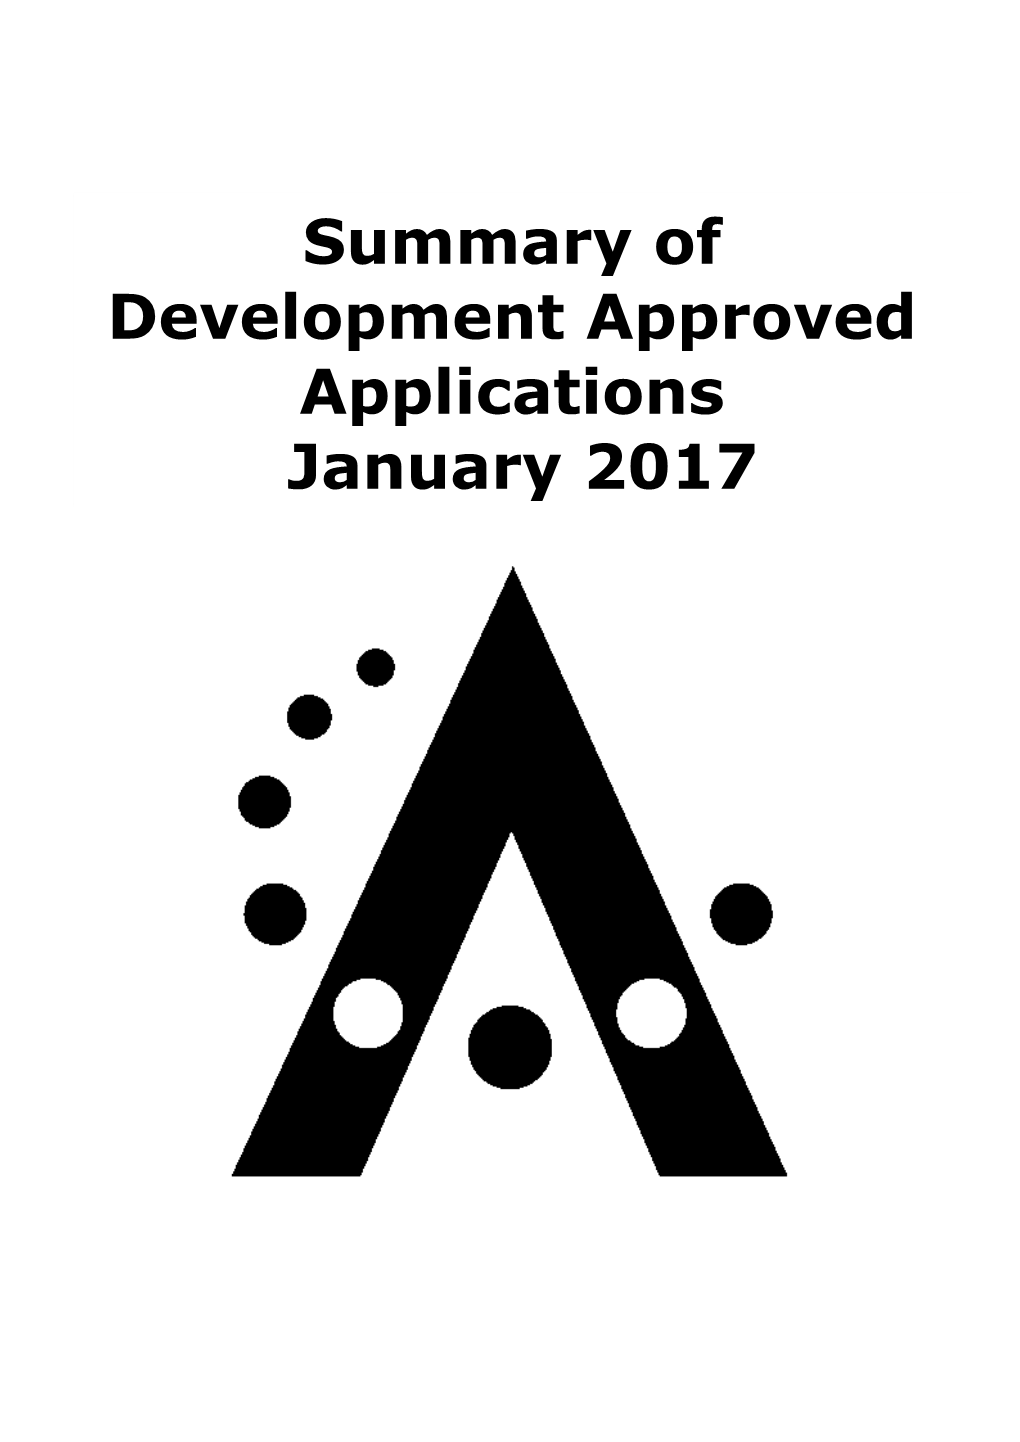 Summary of Development Approved Applications January 2017 Summary of Development Approved Applications January 2017